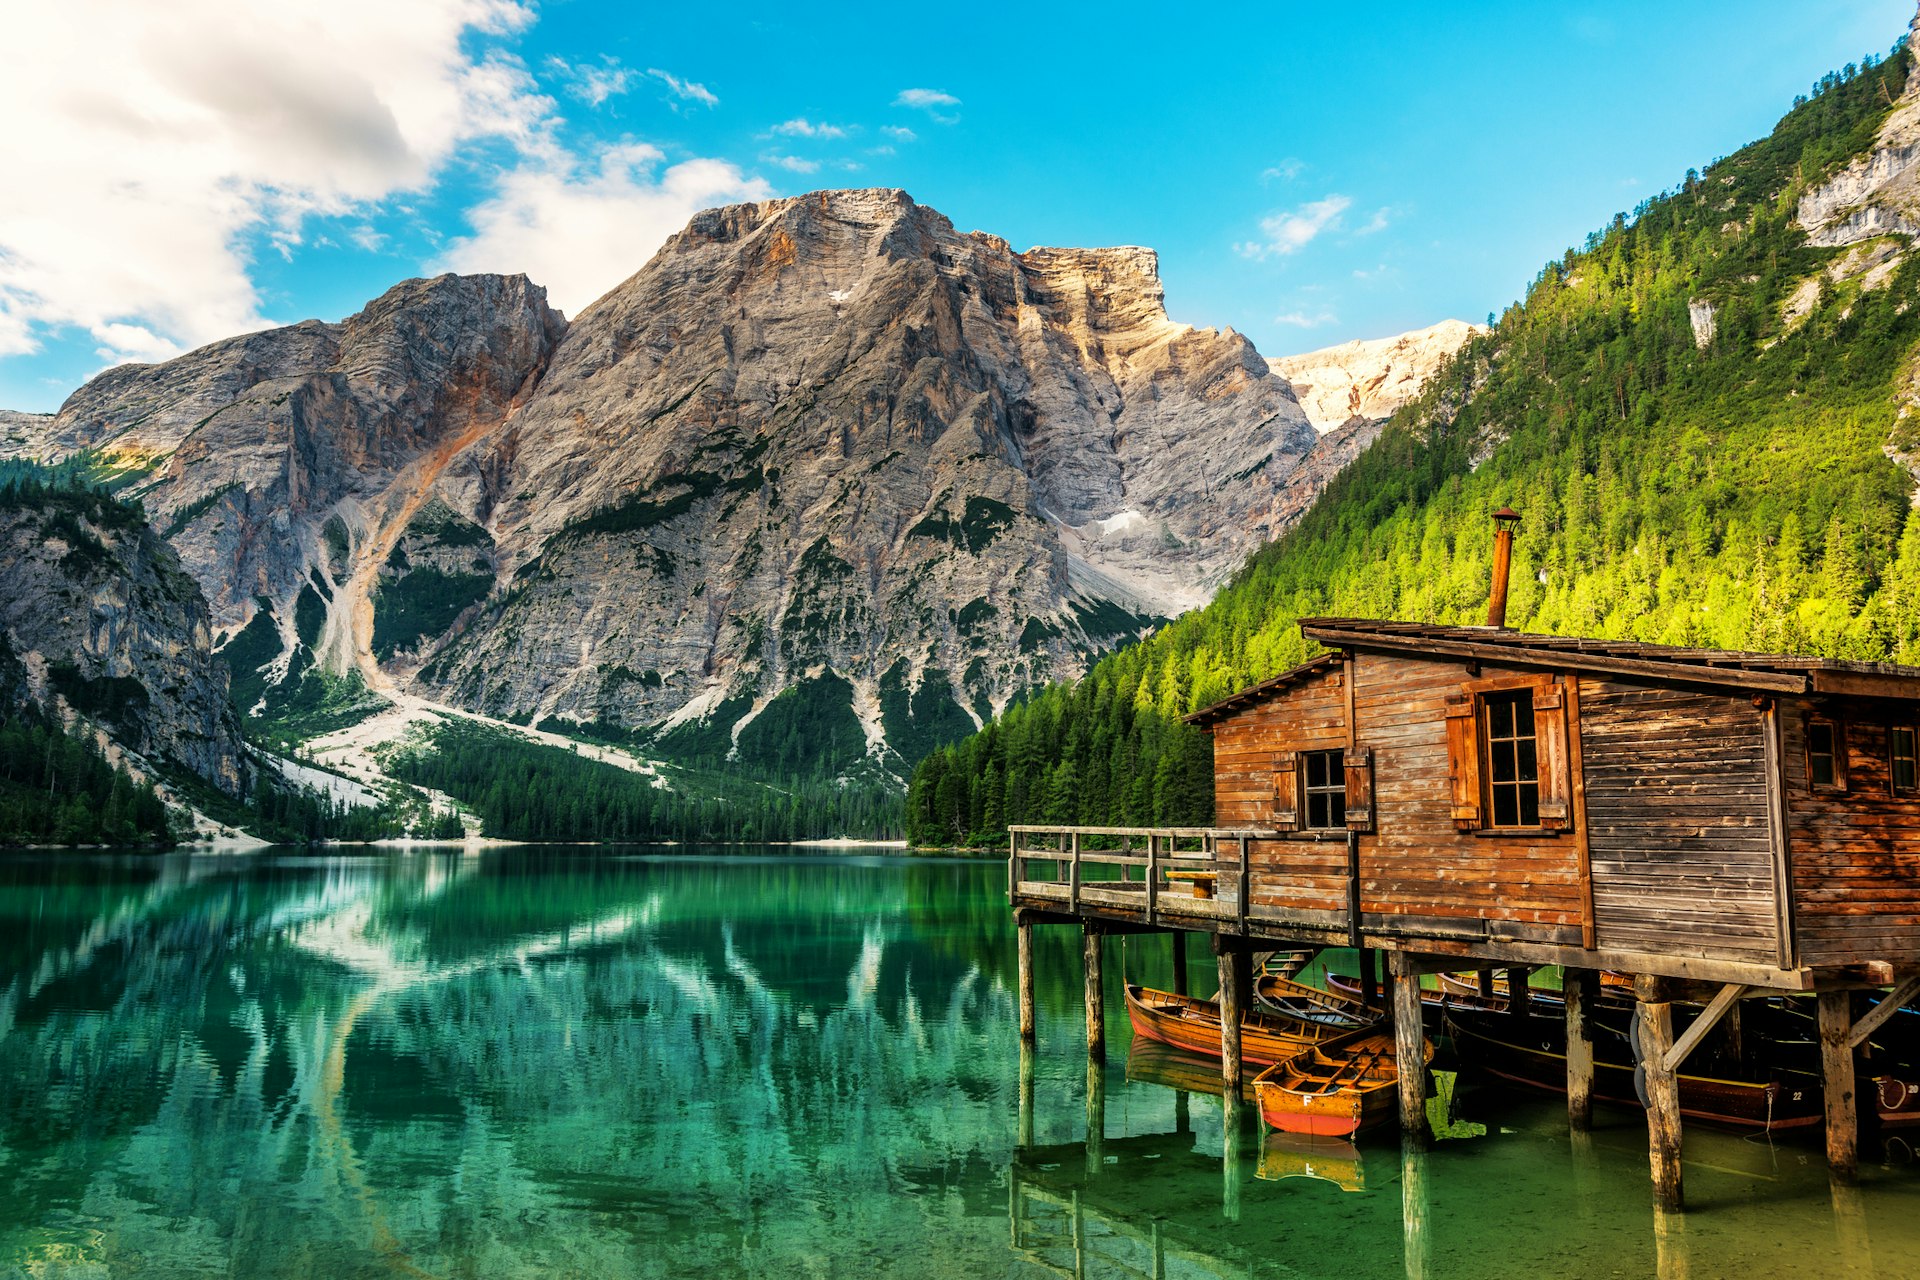 The wooden Boathouse at the Lago di Braies with the Dolomite Mountains in the background